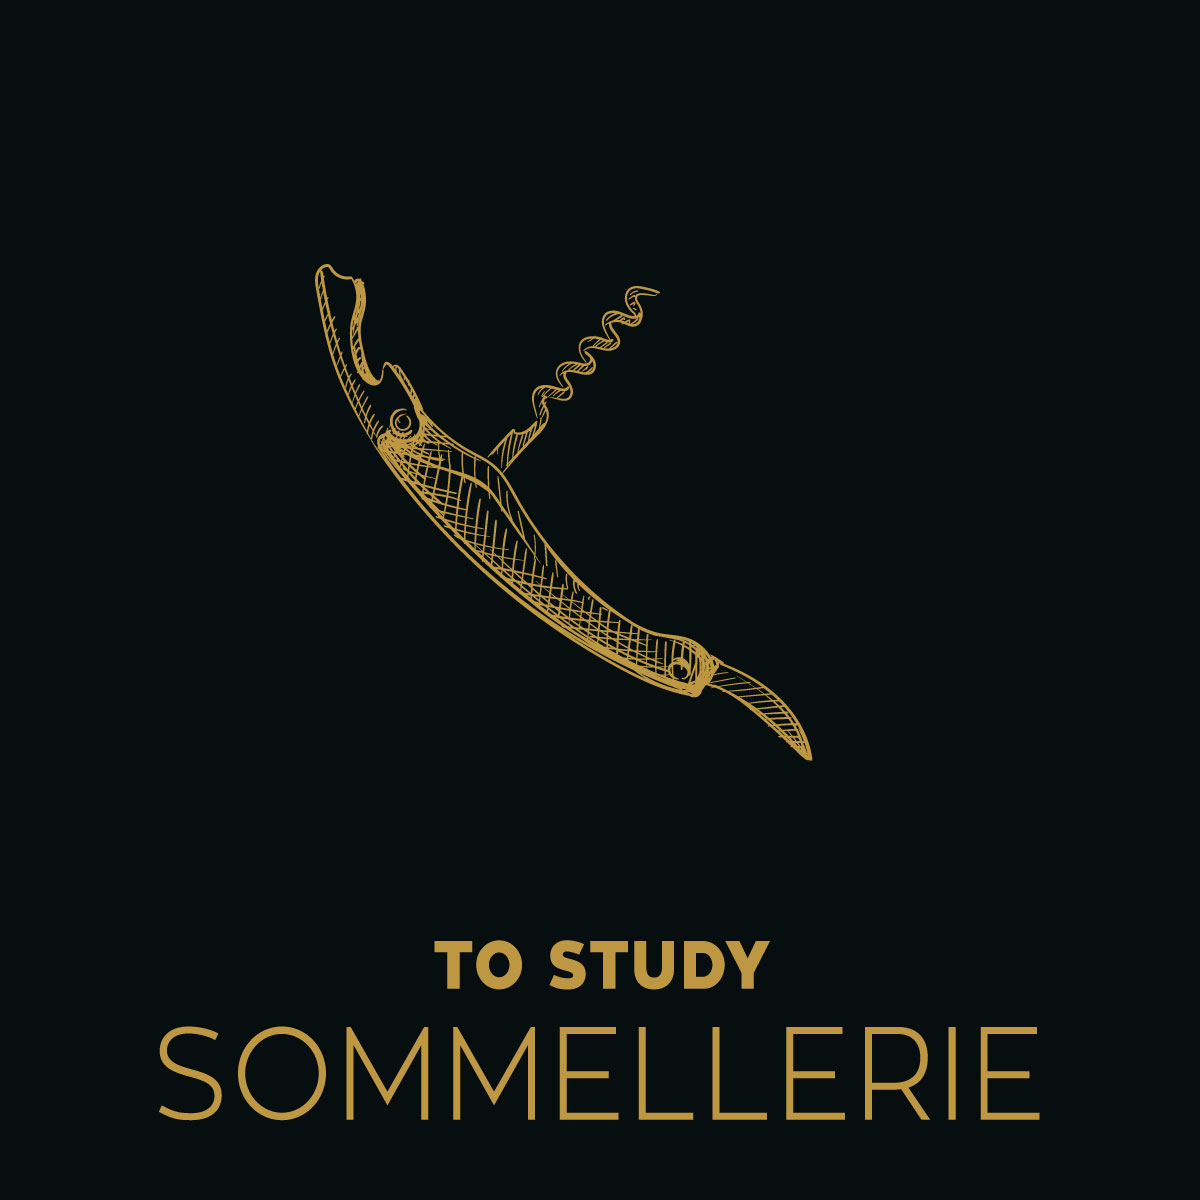 WSPC TO STUDY SOMMELLERIE